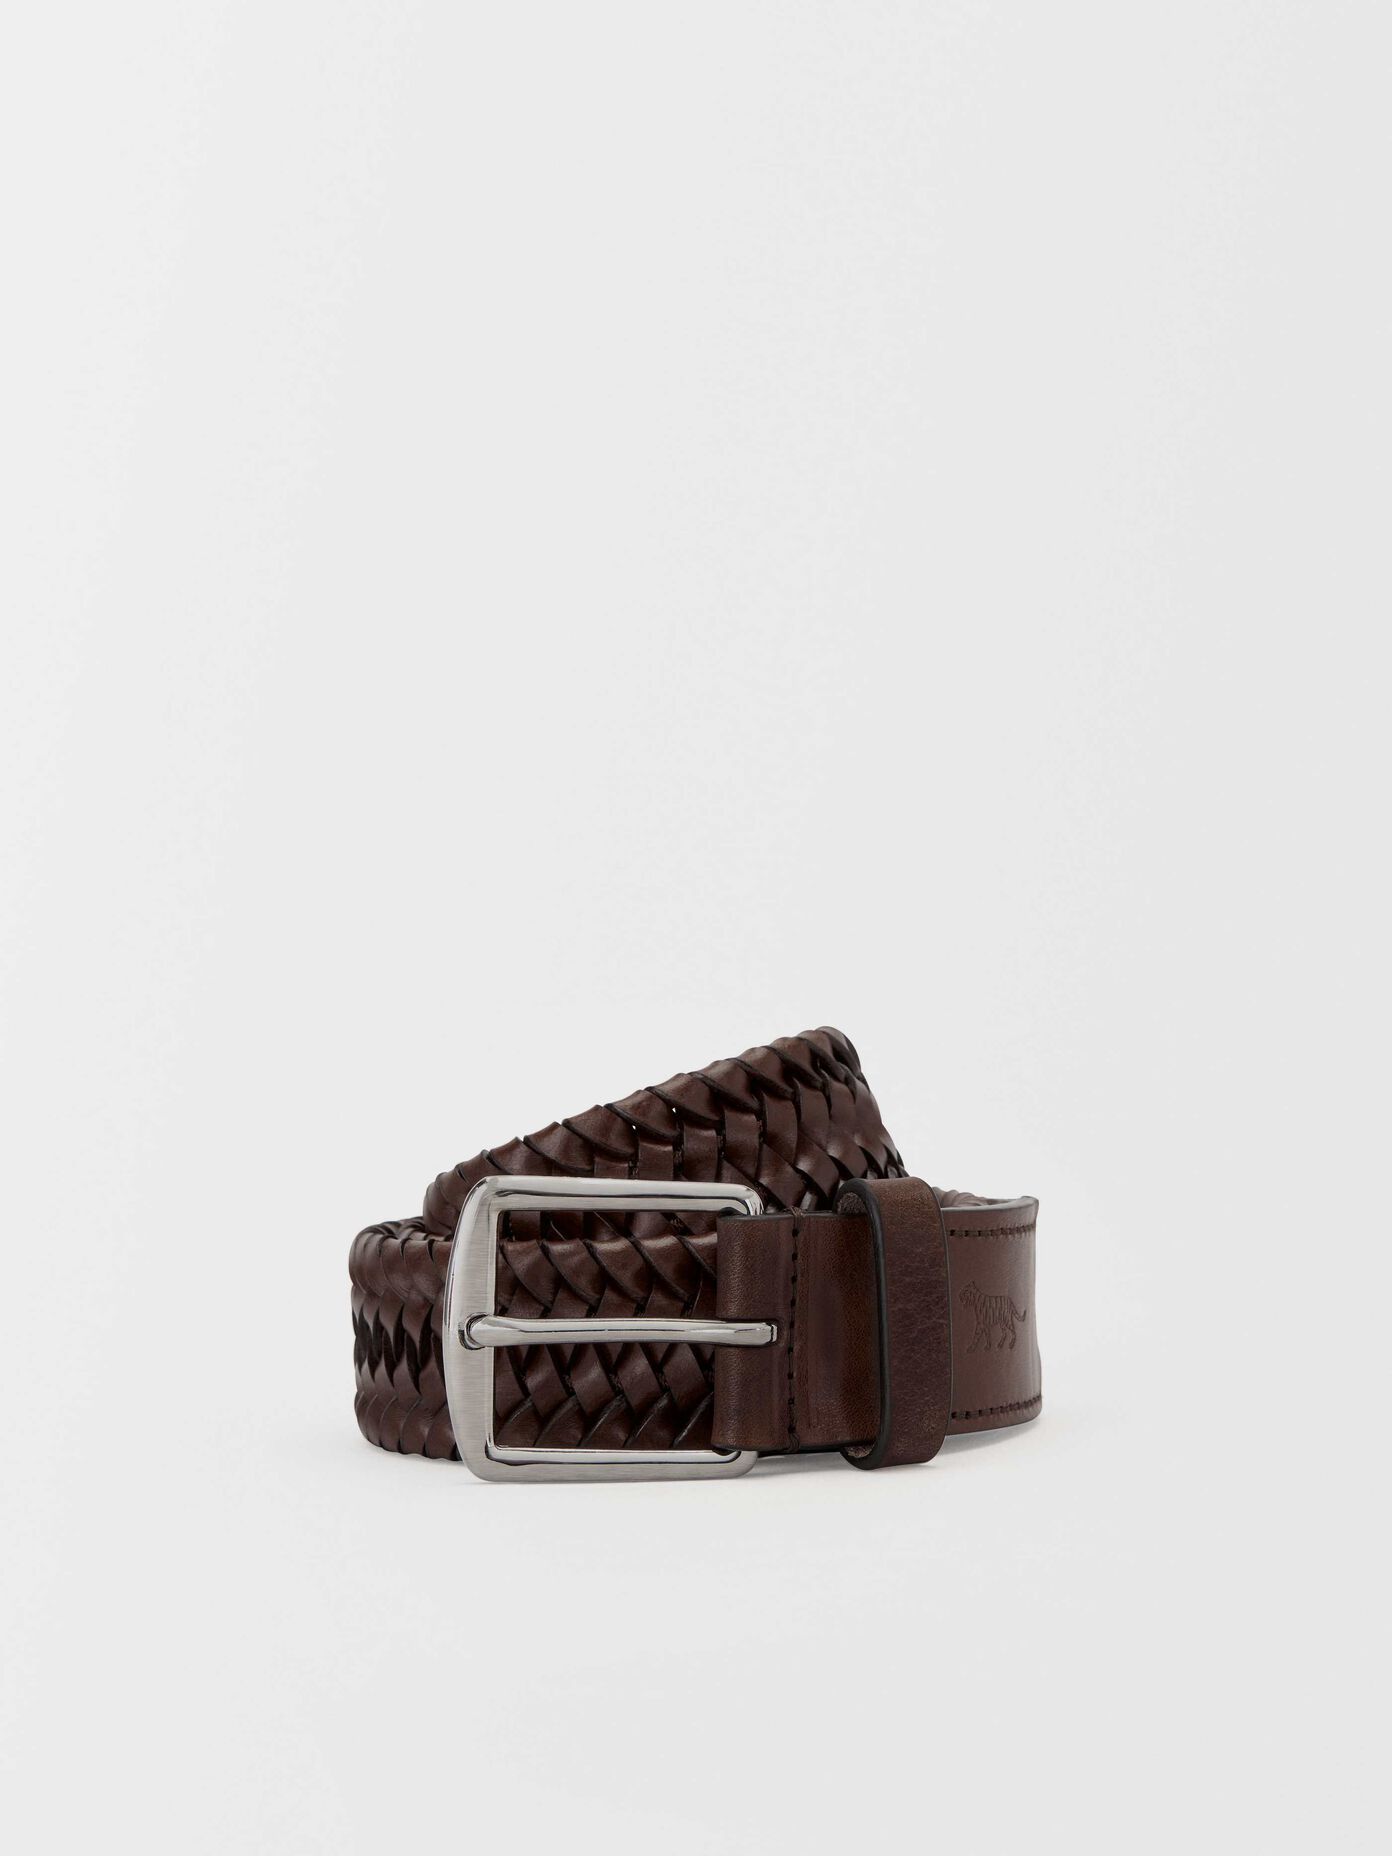 Accessories - Discover men's accessories online at Tiger of Sweden